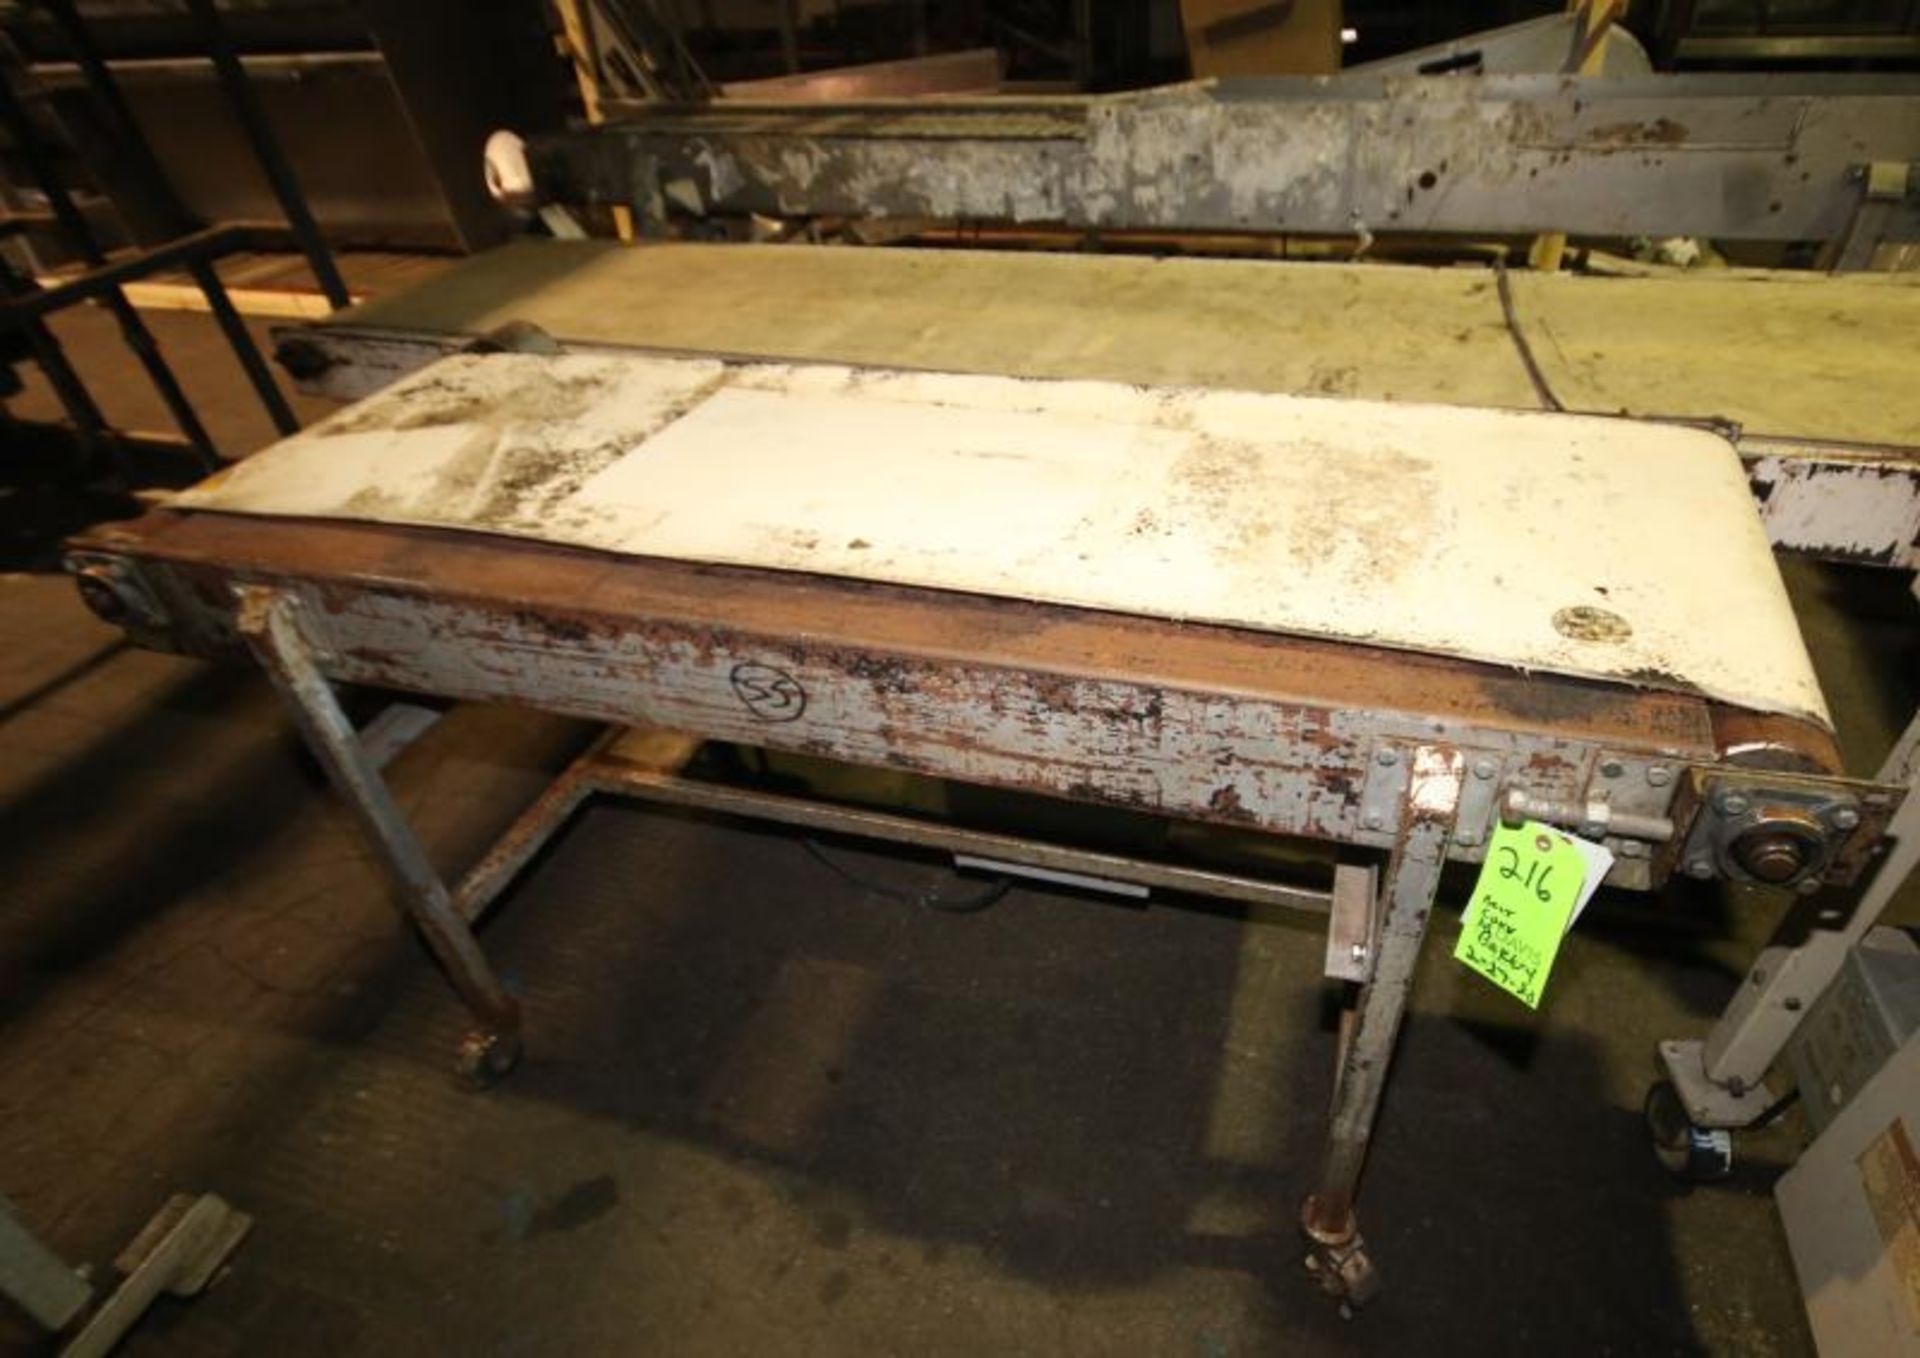 70" L x 20.5" x 34" W Conveyor with Drive, Mounted on Casters(INV#65755) (Located at the MDG Auction